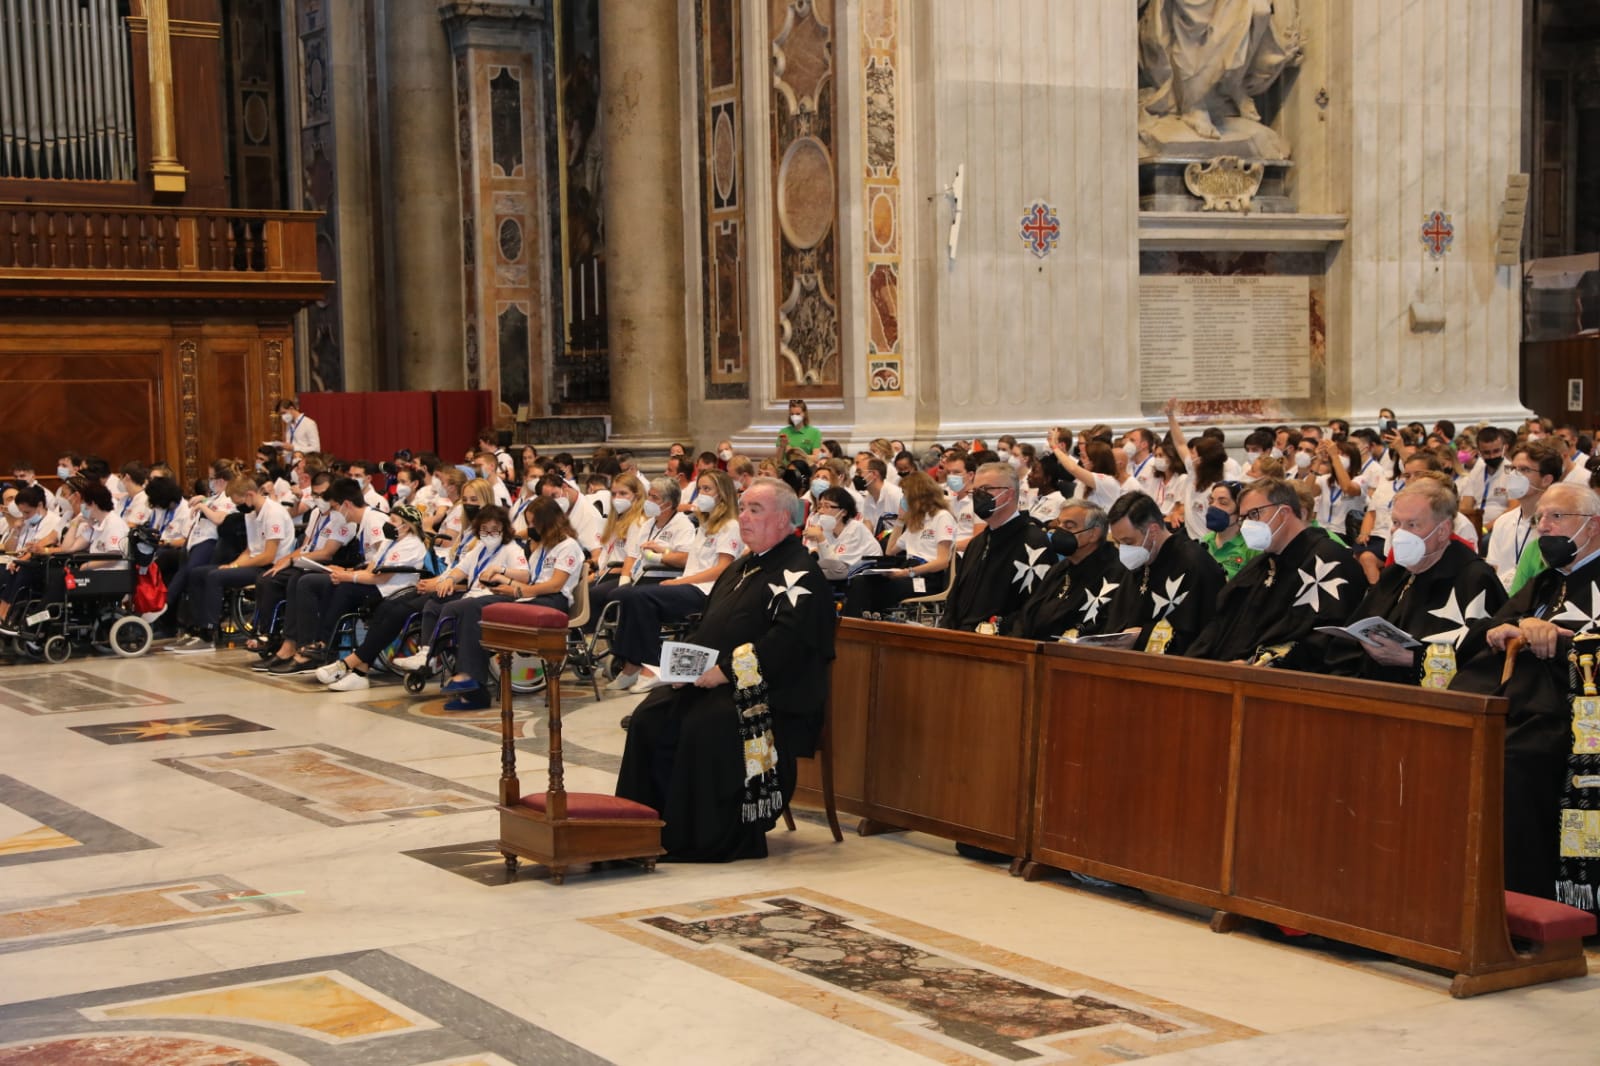 Holy Mass in St Peter’s Basilica for the International Summer Camp youth